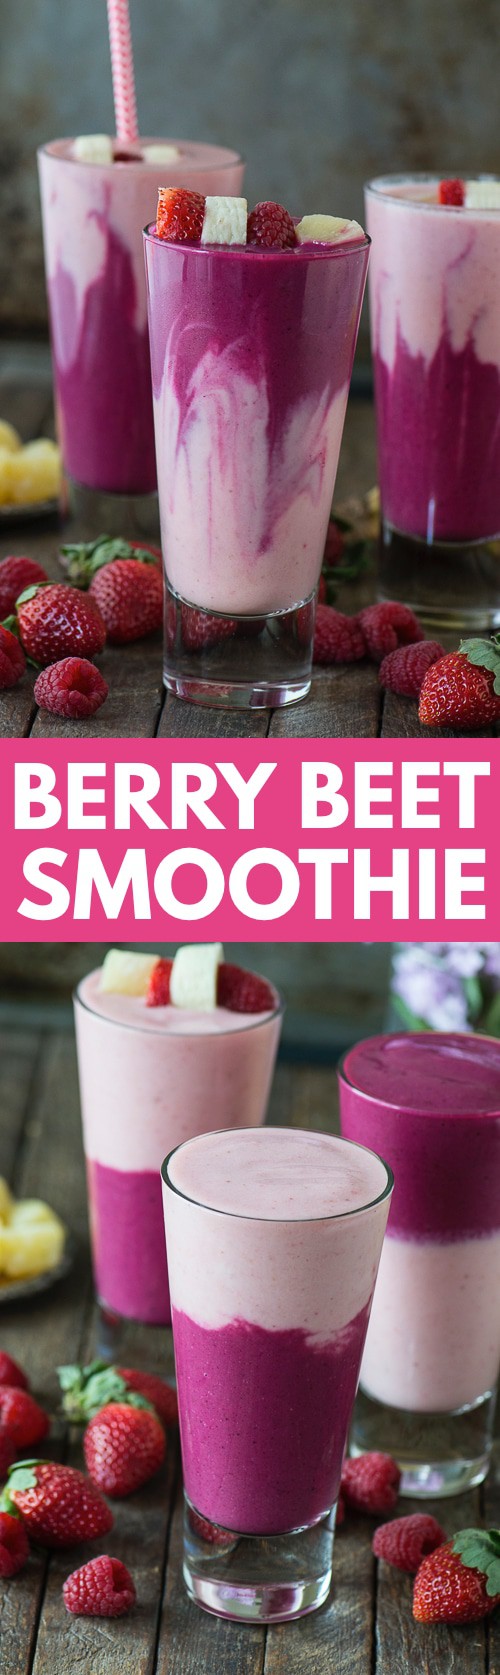 This two layer berry beet smoothie recipe is easy to make, full of fruit, and has a fun color! 